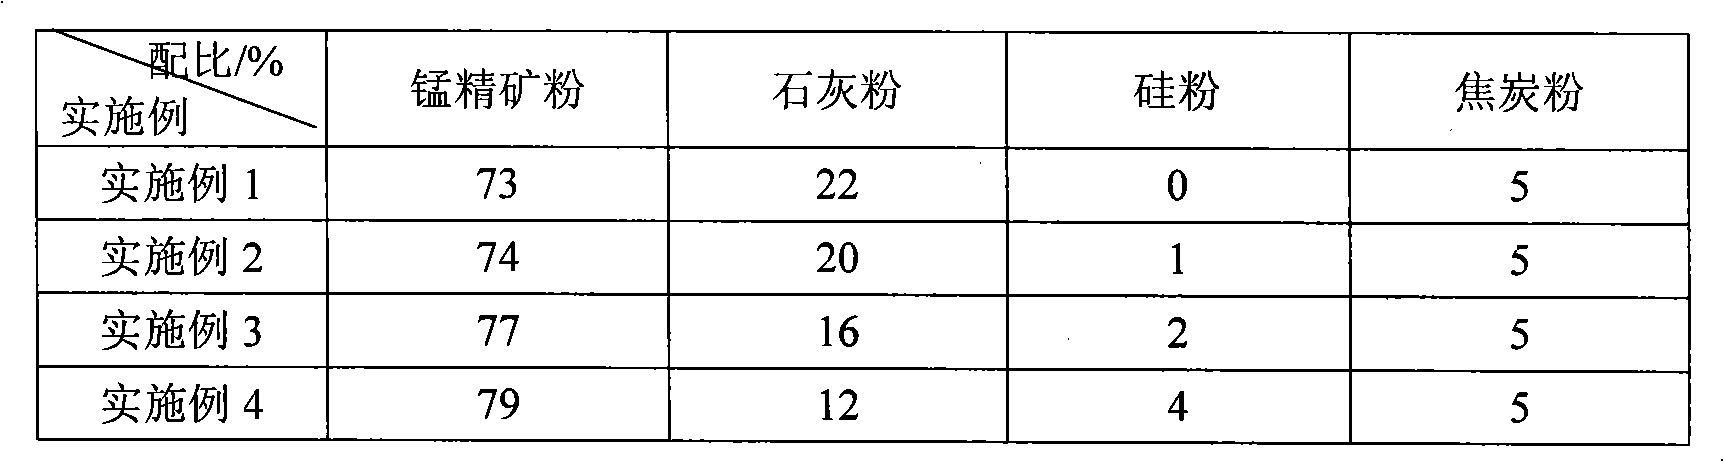 Manganese-based fluxing agent for converter steelmaking and preparation method thereof